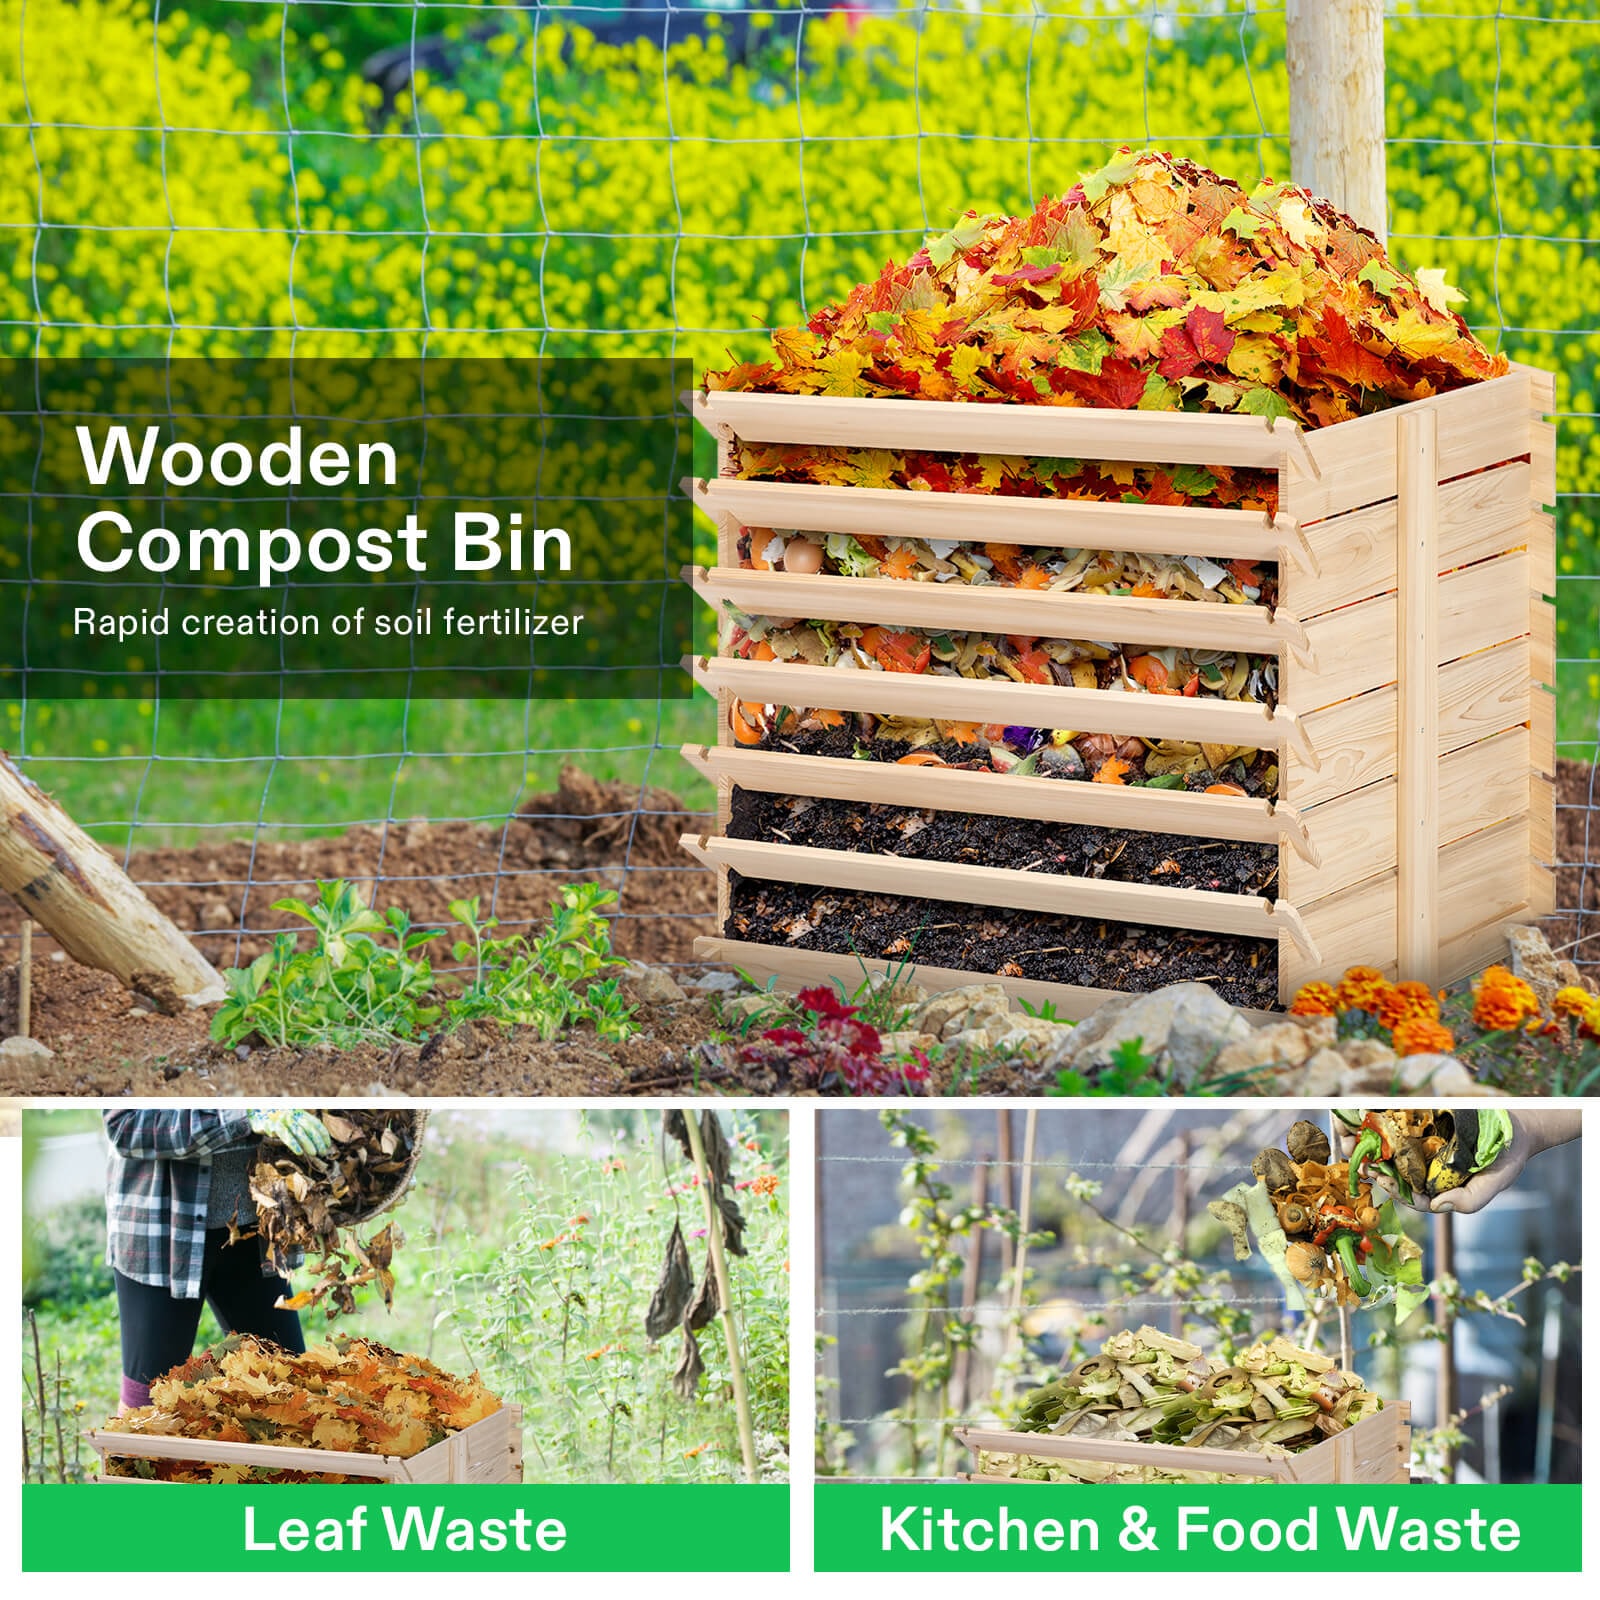 170 Gallon Wooden Compost Bin, Removable Front Door, Easy to Setup for Backyard, Lawn (Black with Gloves and Liner)